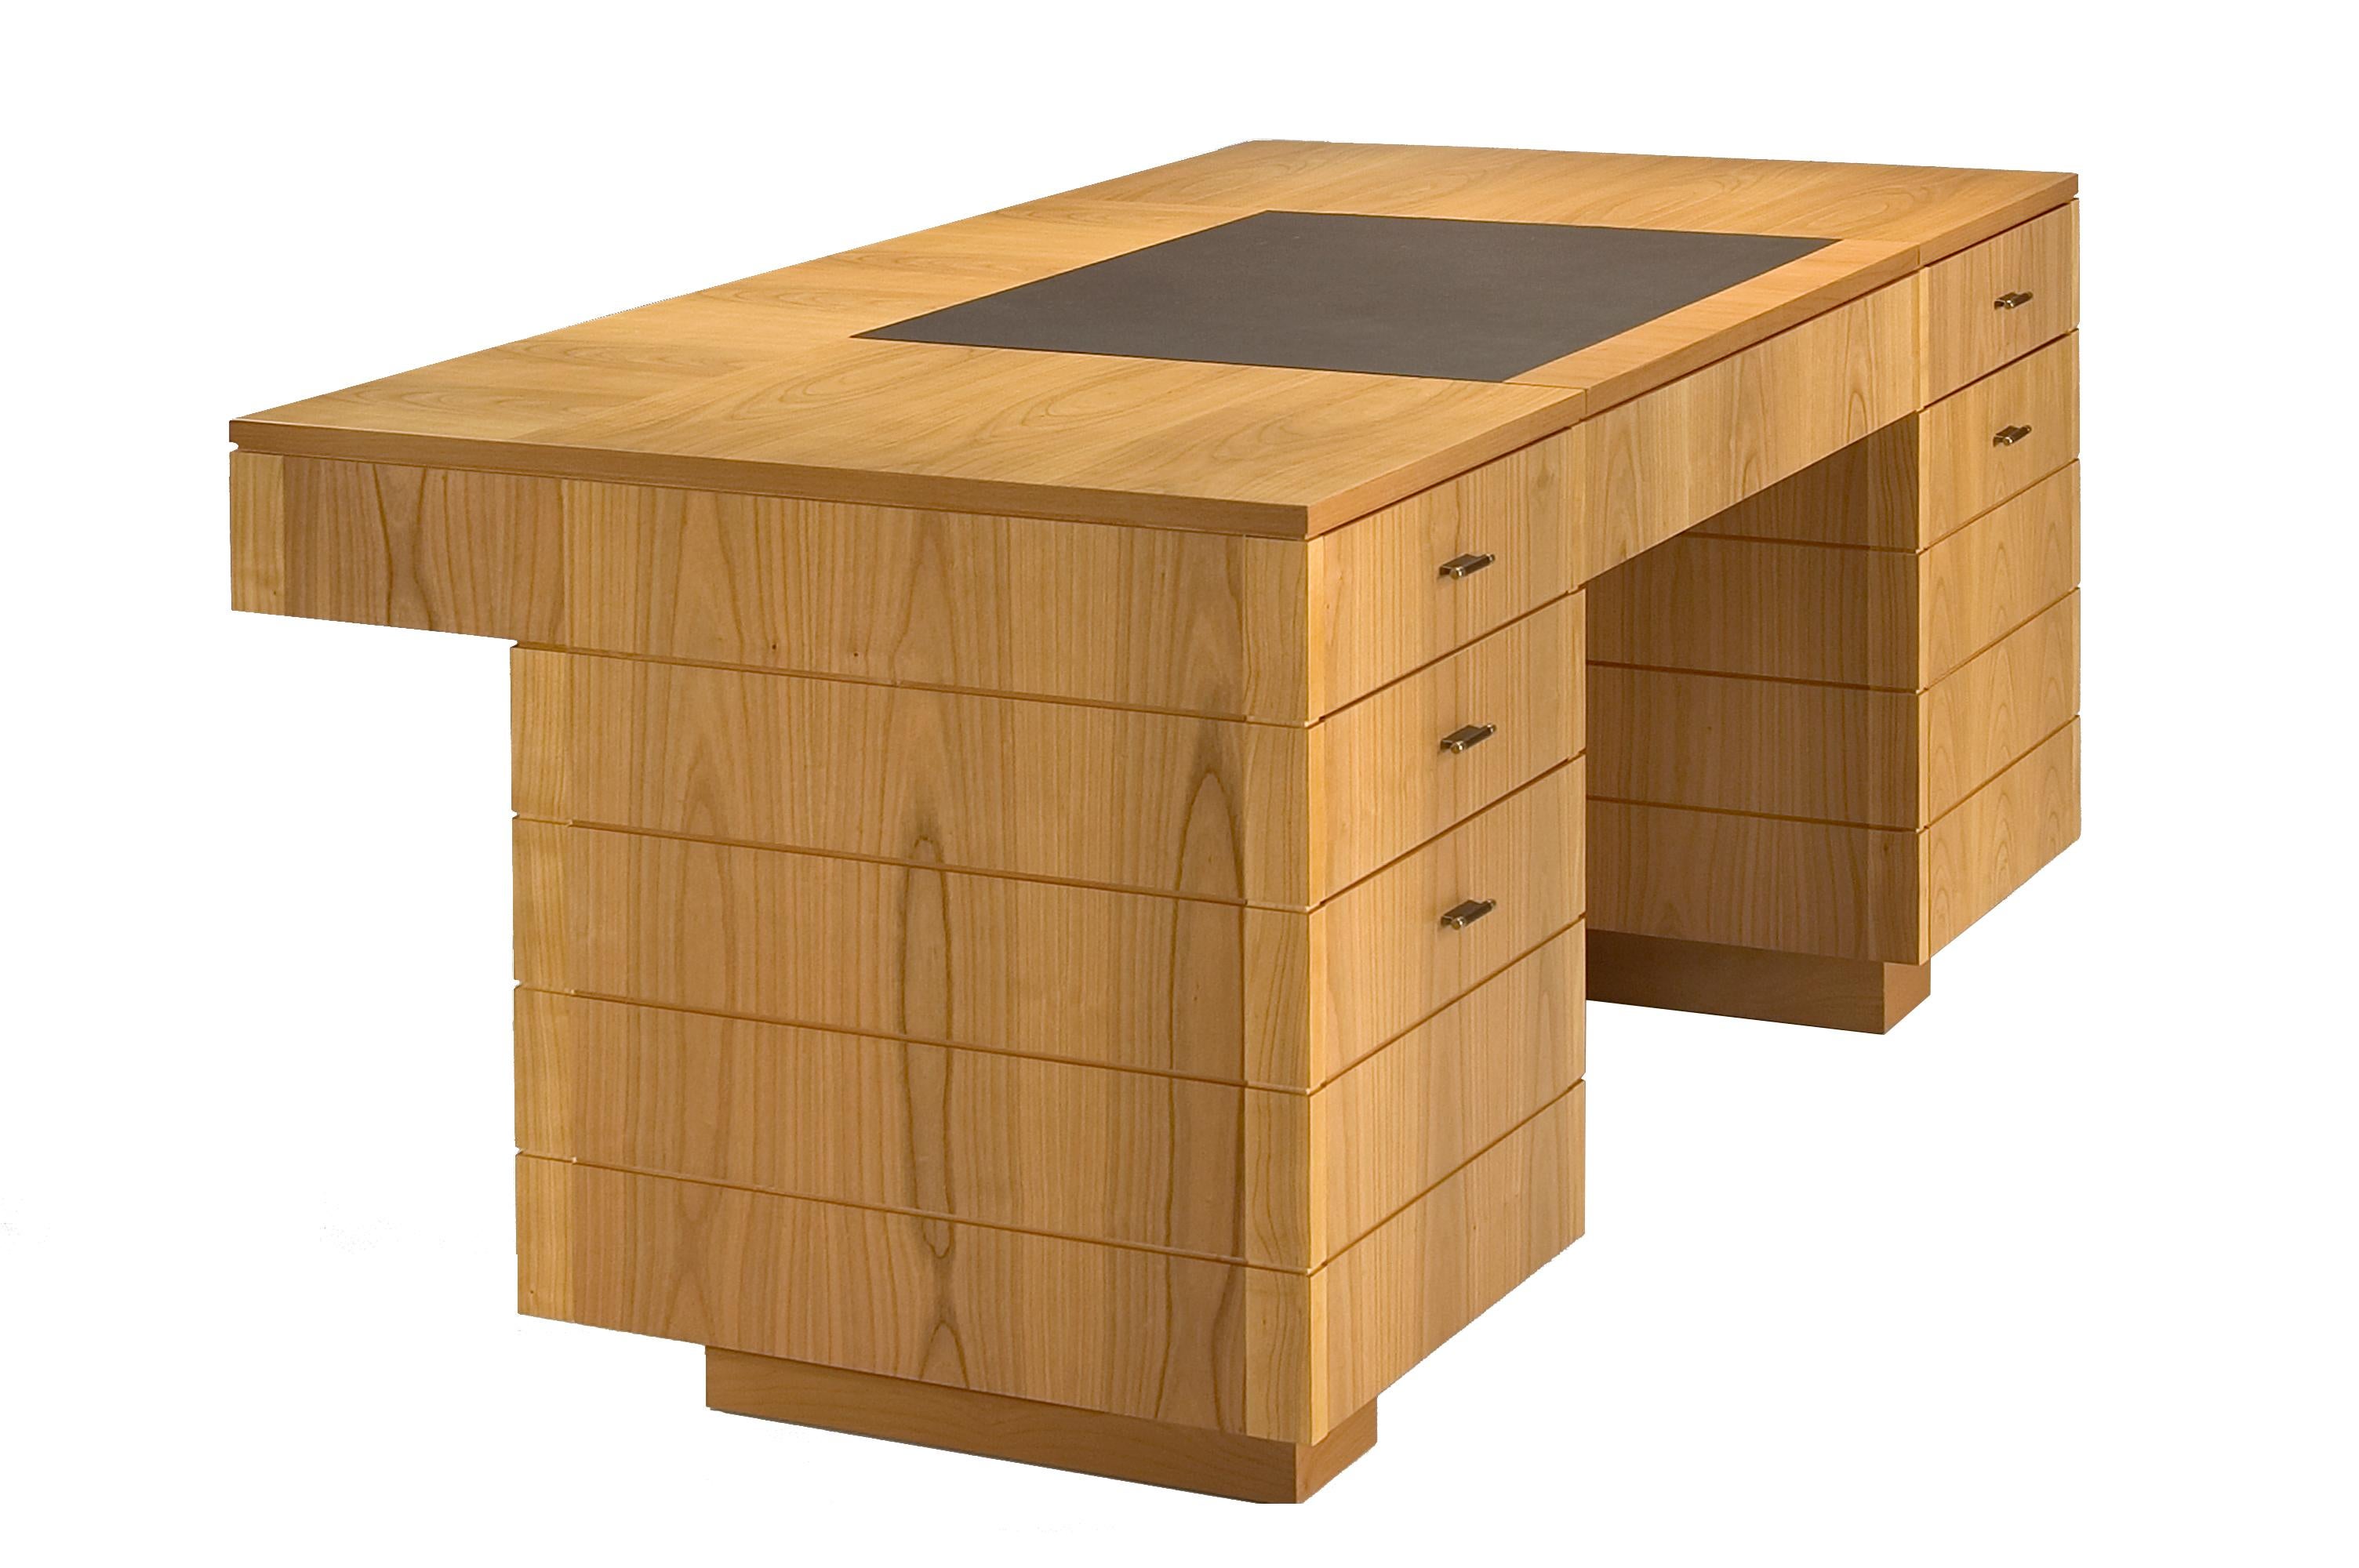 Contemporary '900 Style Wooden Desk in Cherry Wood with Leather Top and Drawers, by Morelato